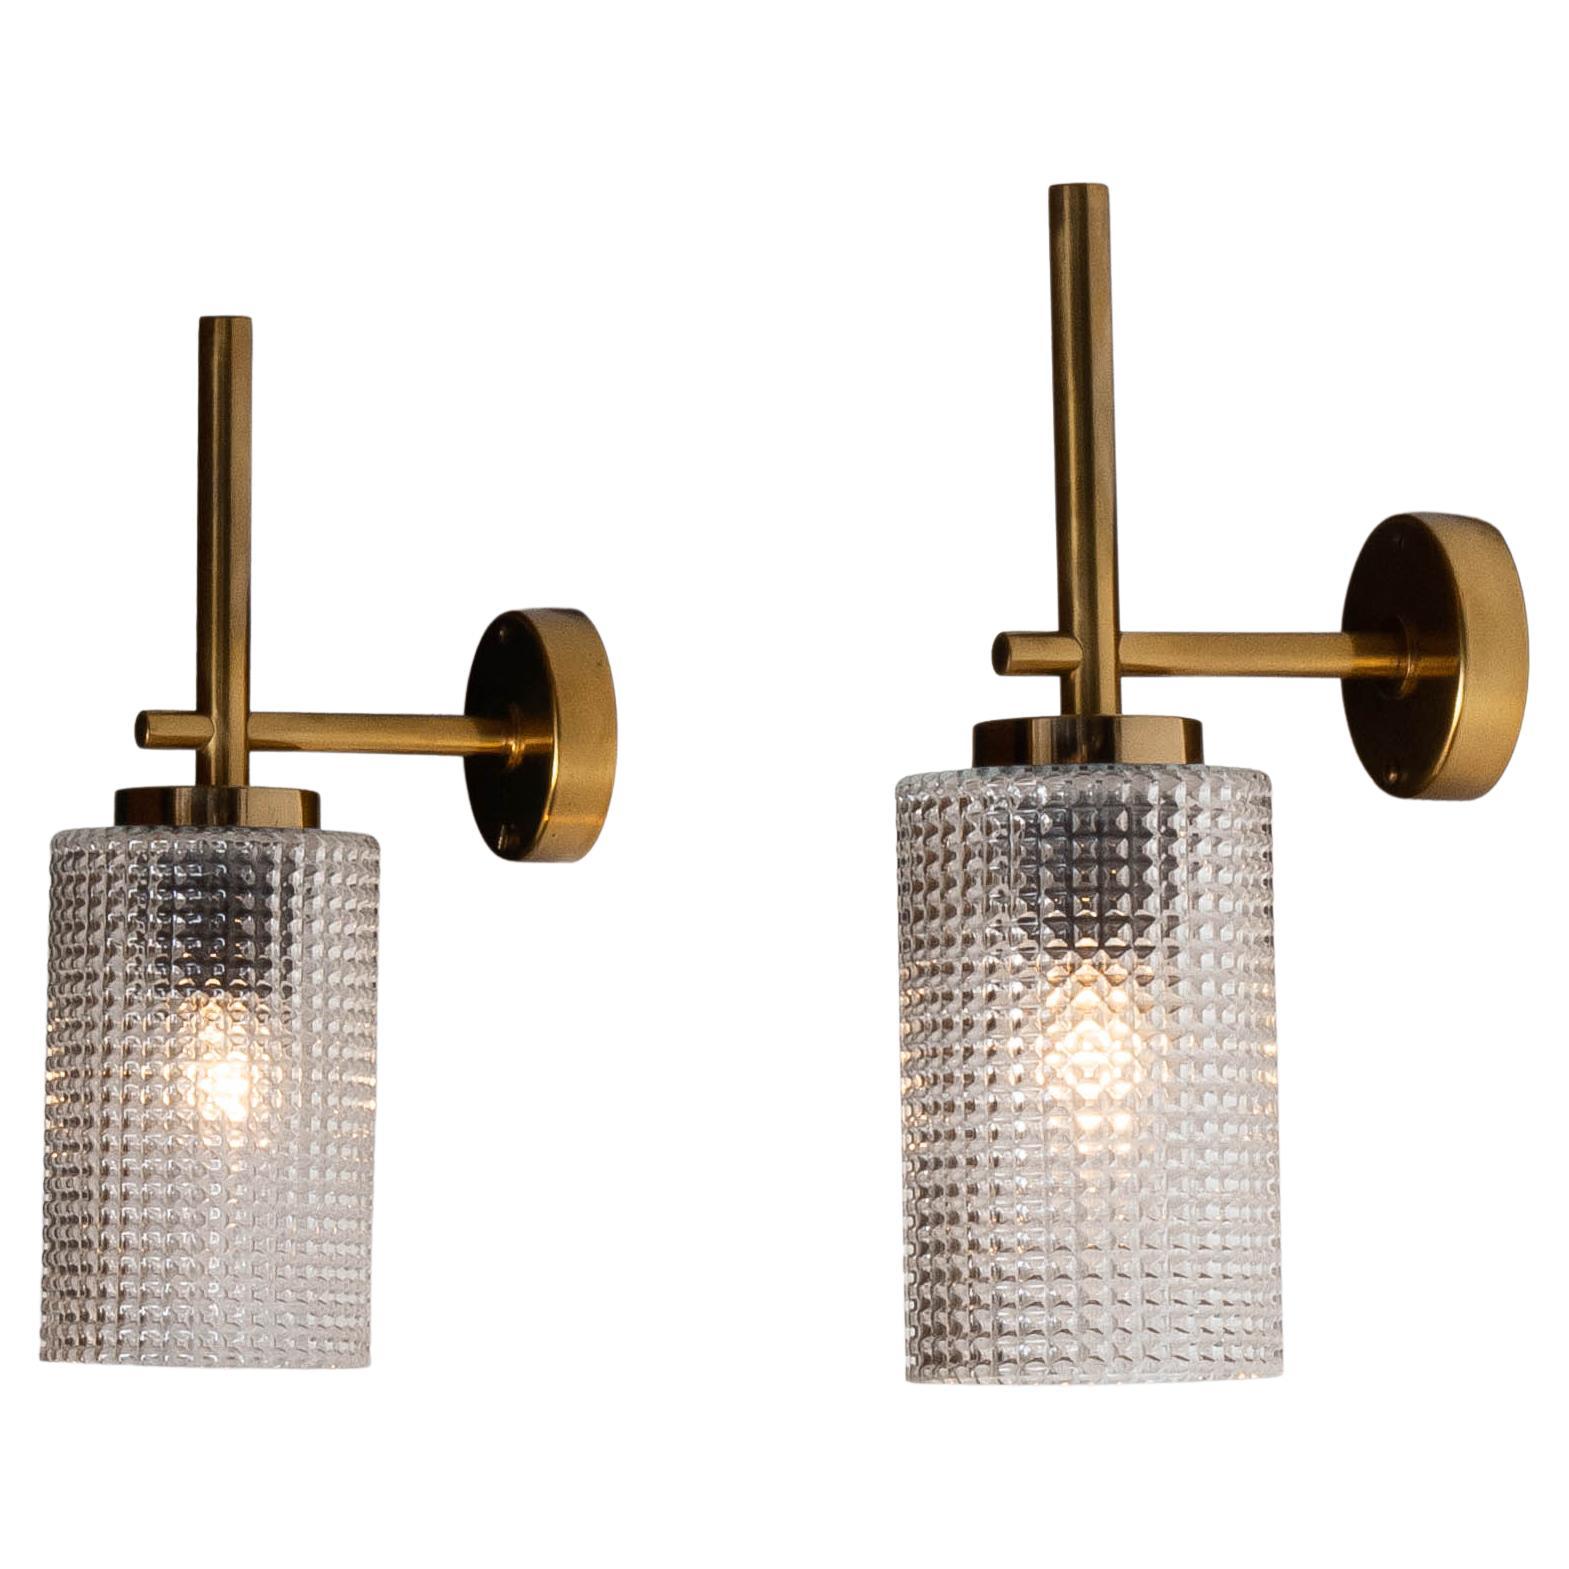 1960s Pair Swedish Brass Wall Lights / Sconces by Carl Fagerlund for Orrefors